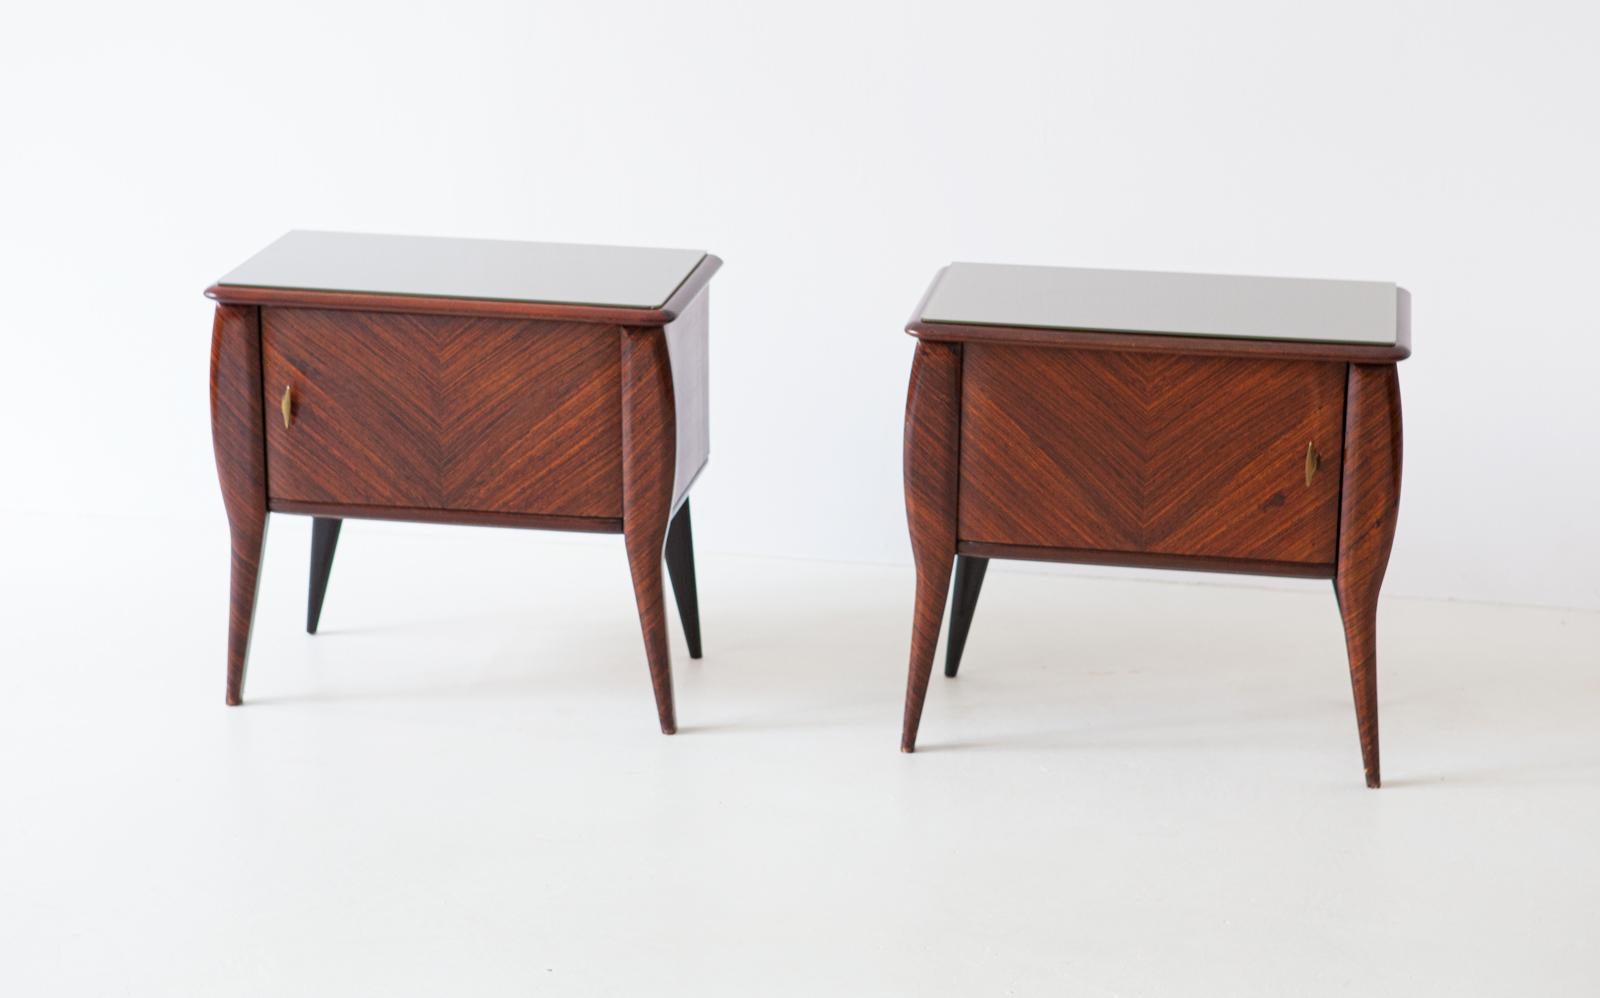 Set of two nightstands, manufactured in Italy in 1950s
These two side tables has made mahogany wood and glass top.

Very good shape, only light and pleasant signs of aging remain visible.
Brass handless

This is a Mid-Century Modern style